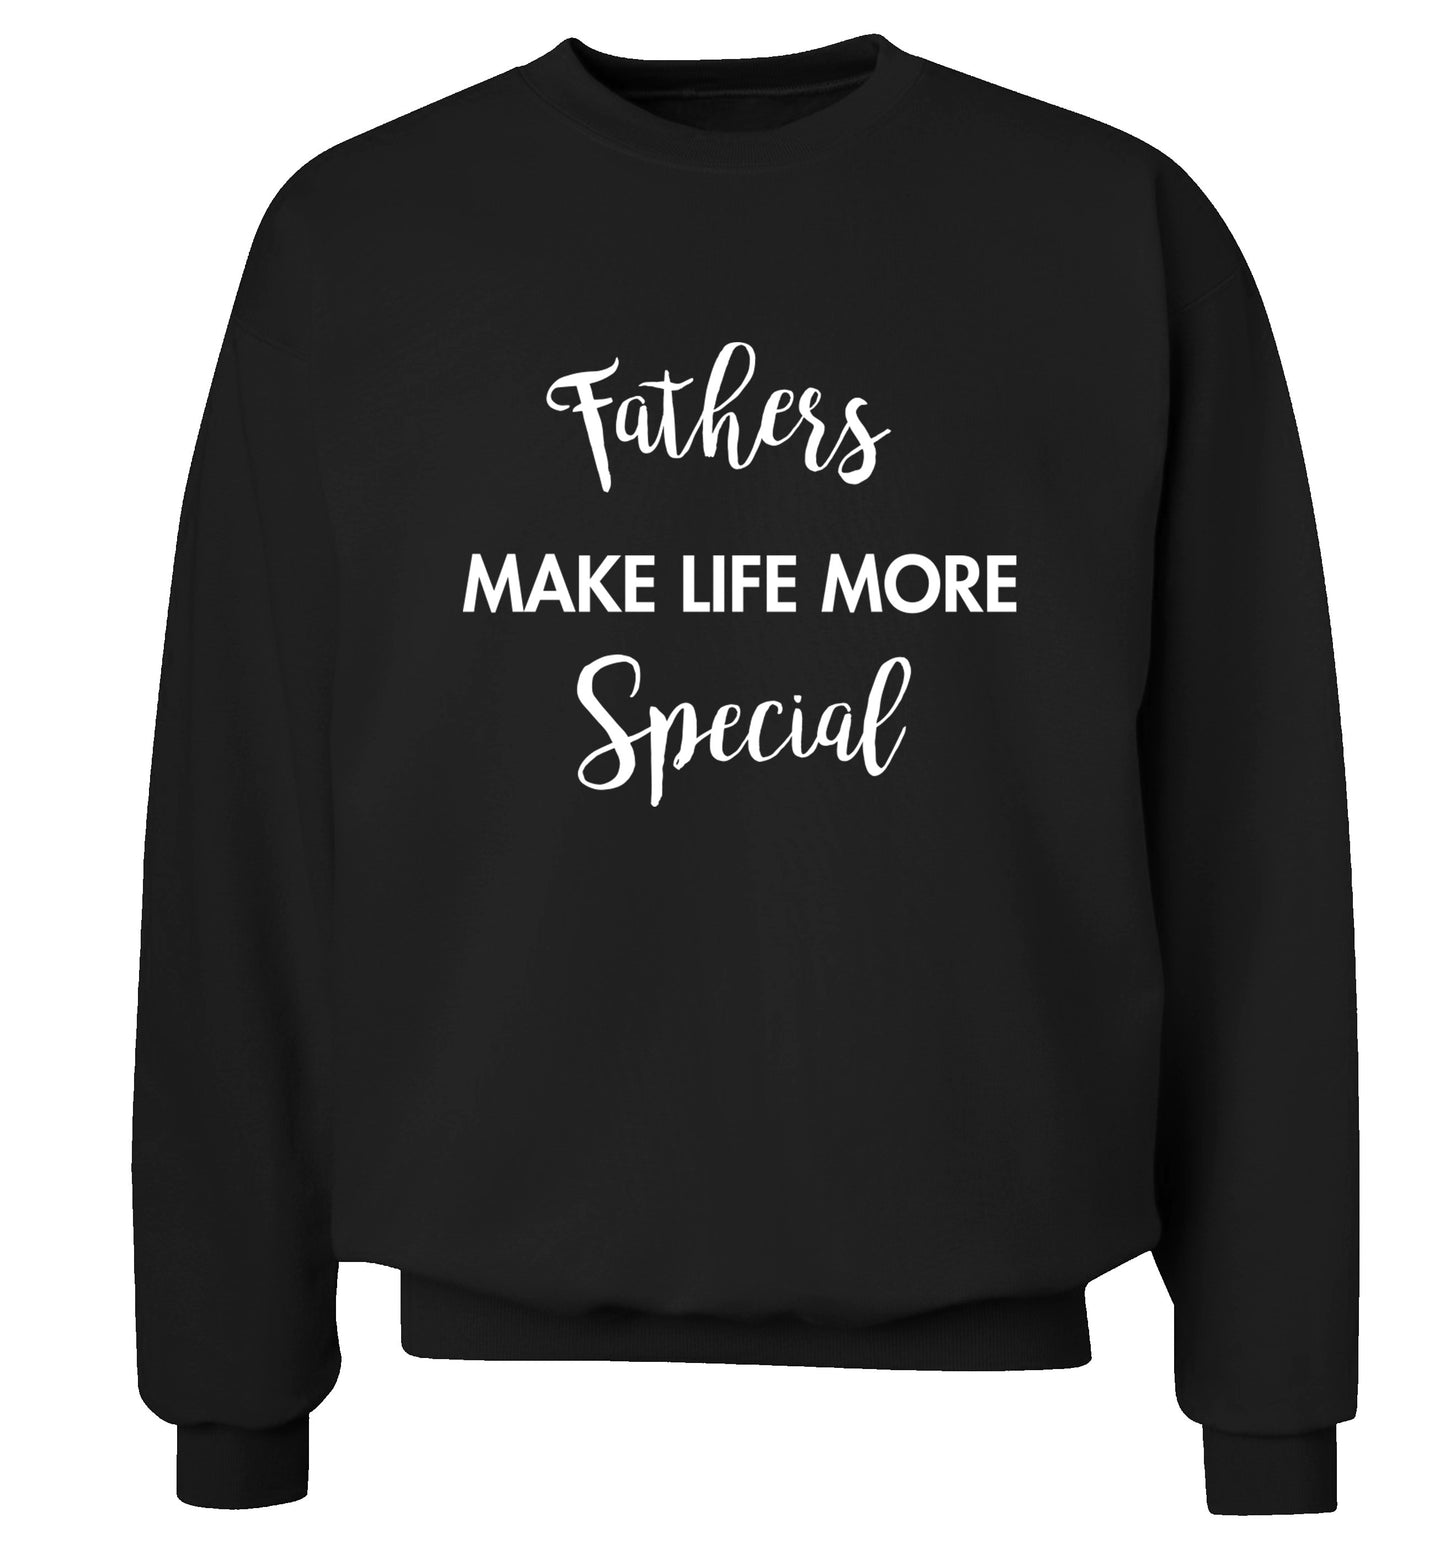 Fathers make life more special Adult's unisex black Sweater 2XL